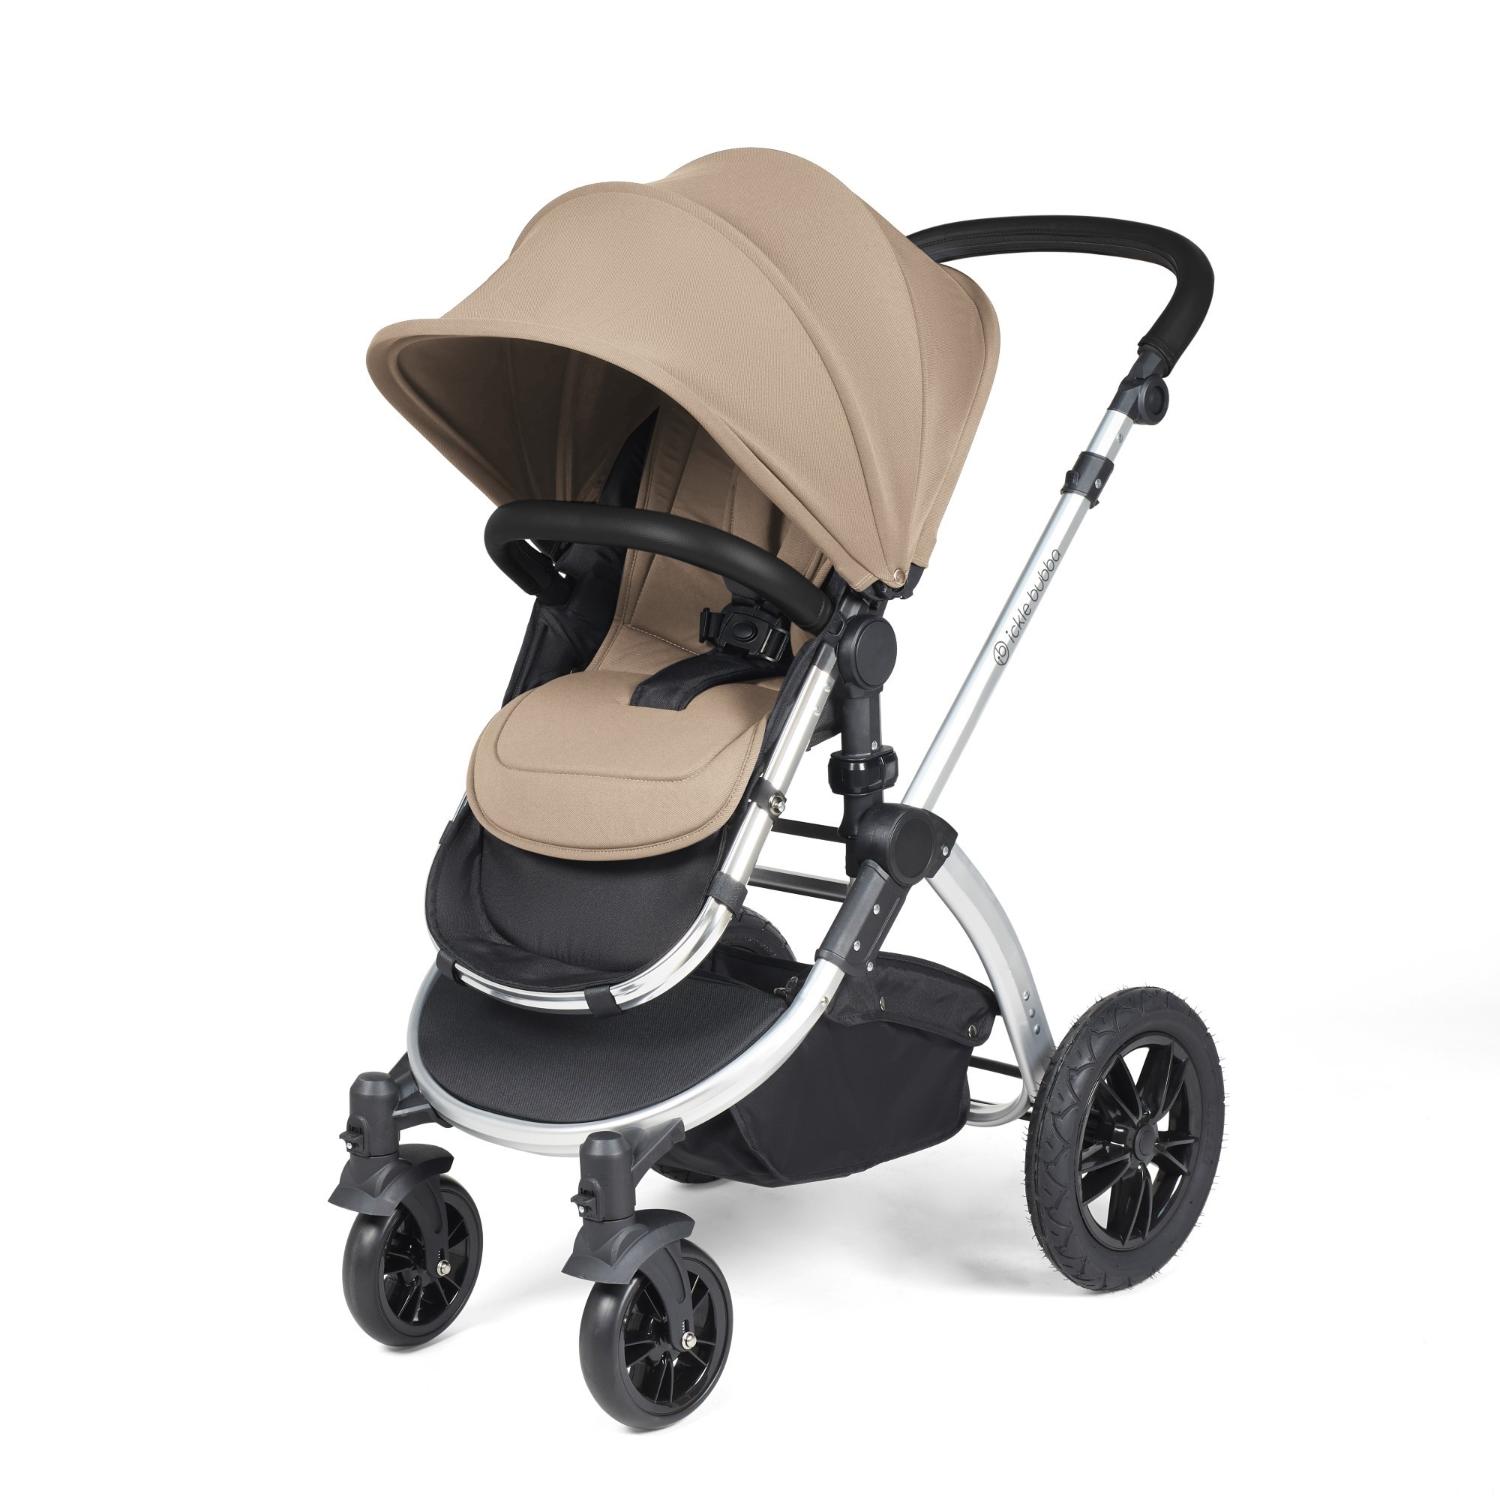 Ickle Bubba Stomp Luxe Pushchair with seat unit attached in Desert beige colour with silver chassis